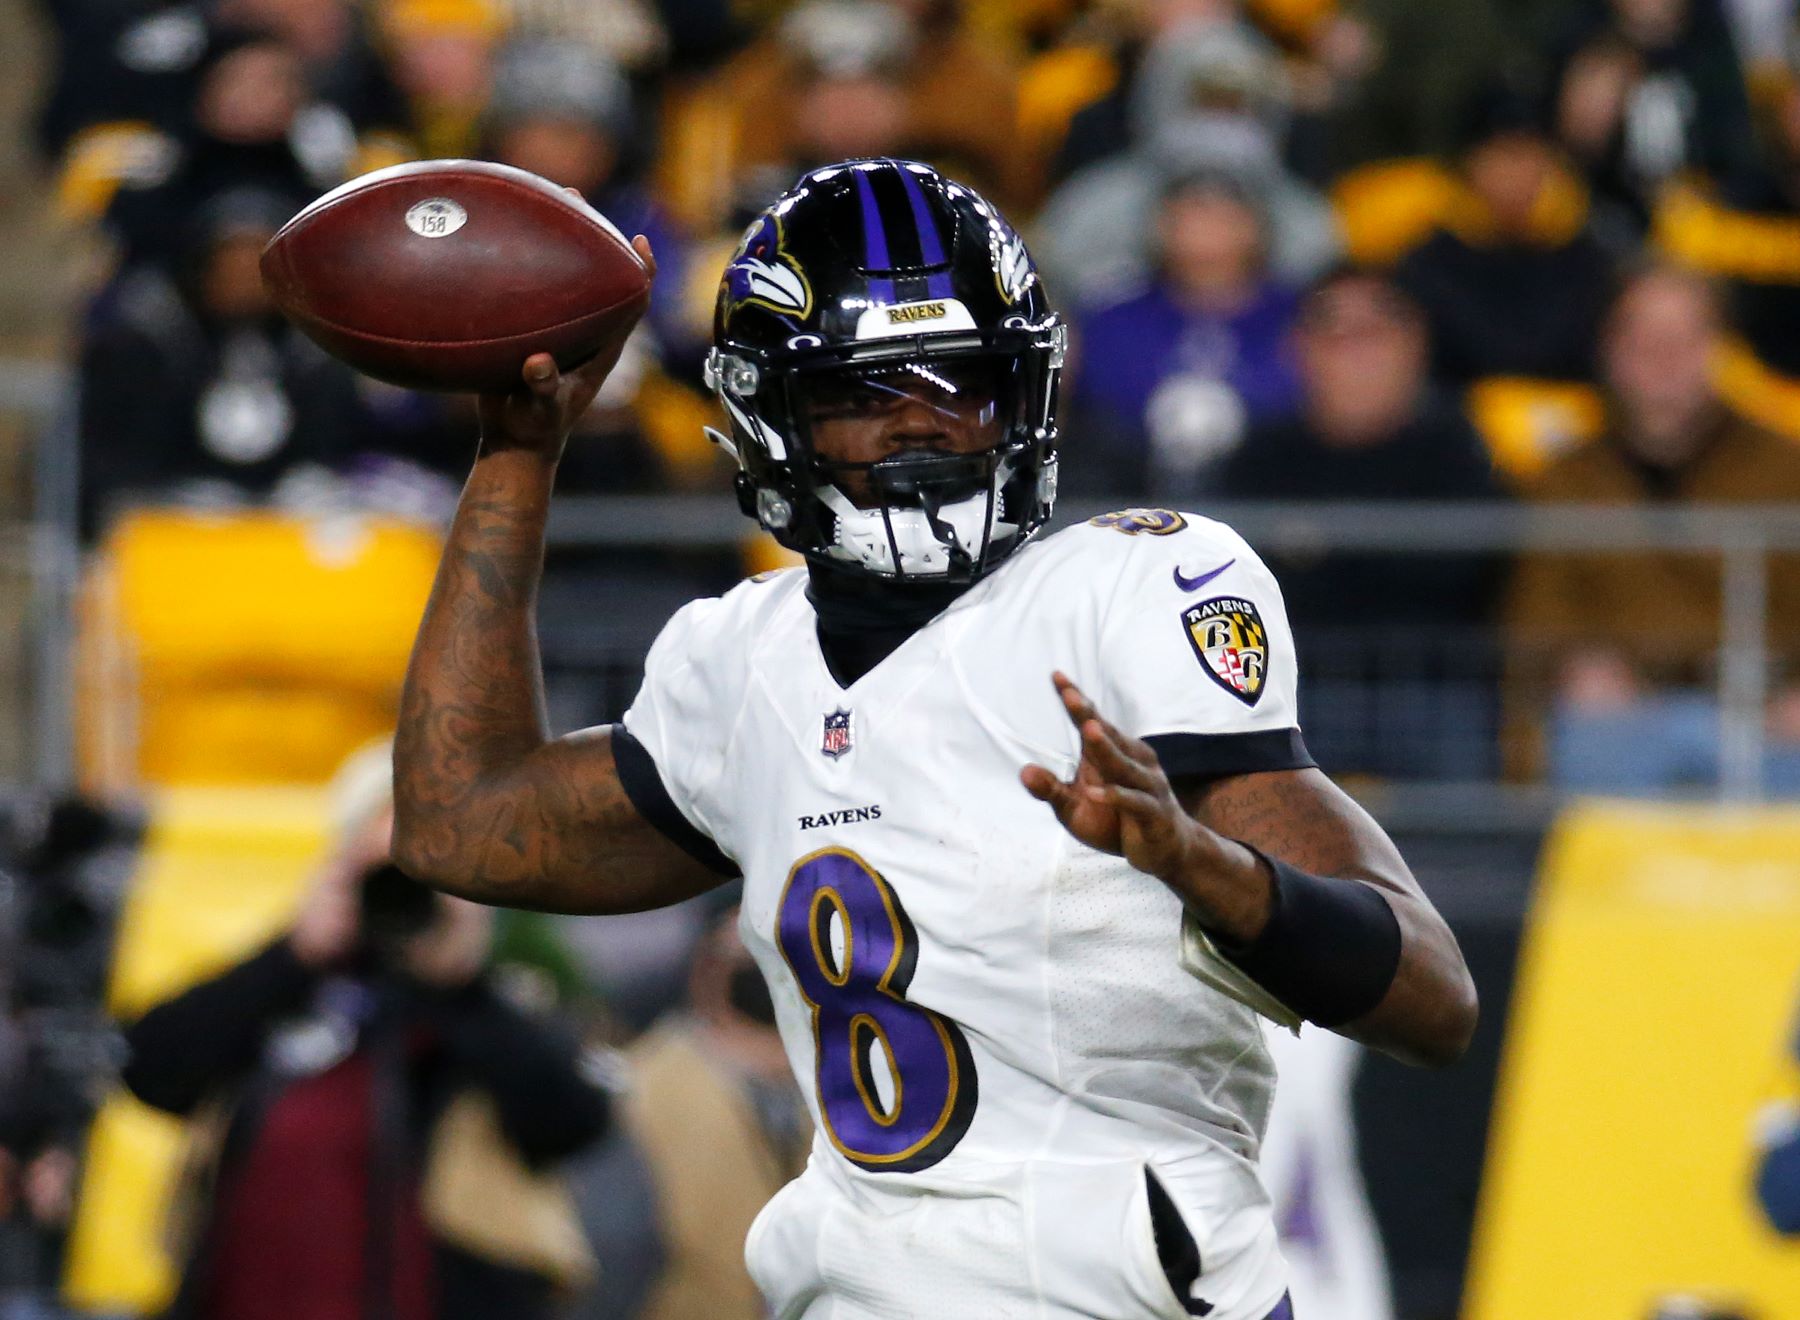 Quarterback Lamar Jackson as #8 on the Baltimore Ravens team of the NFL during a game against the Pittsburgh Steelers